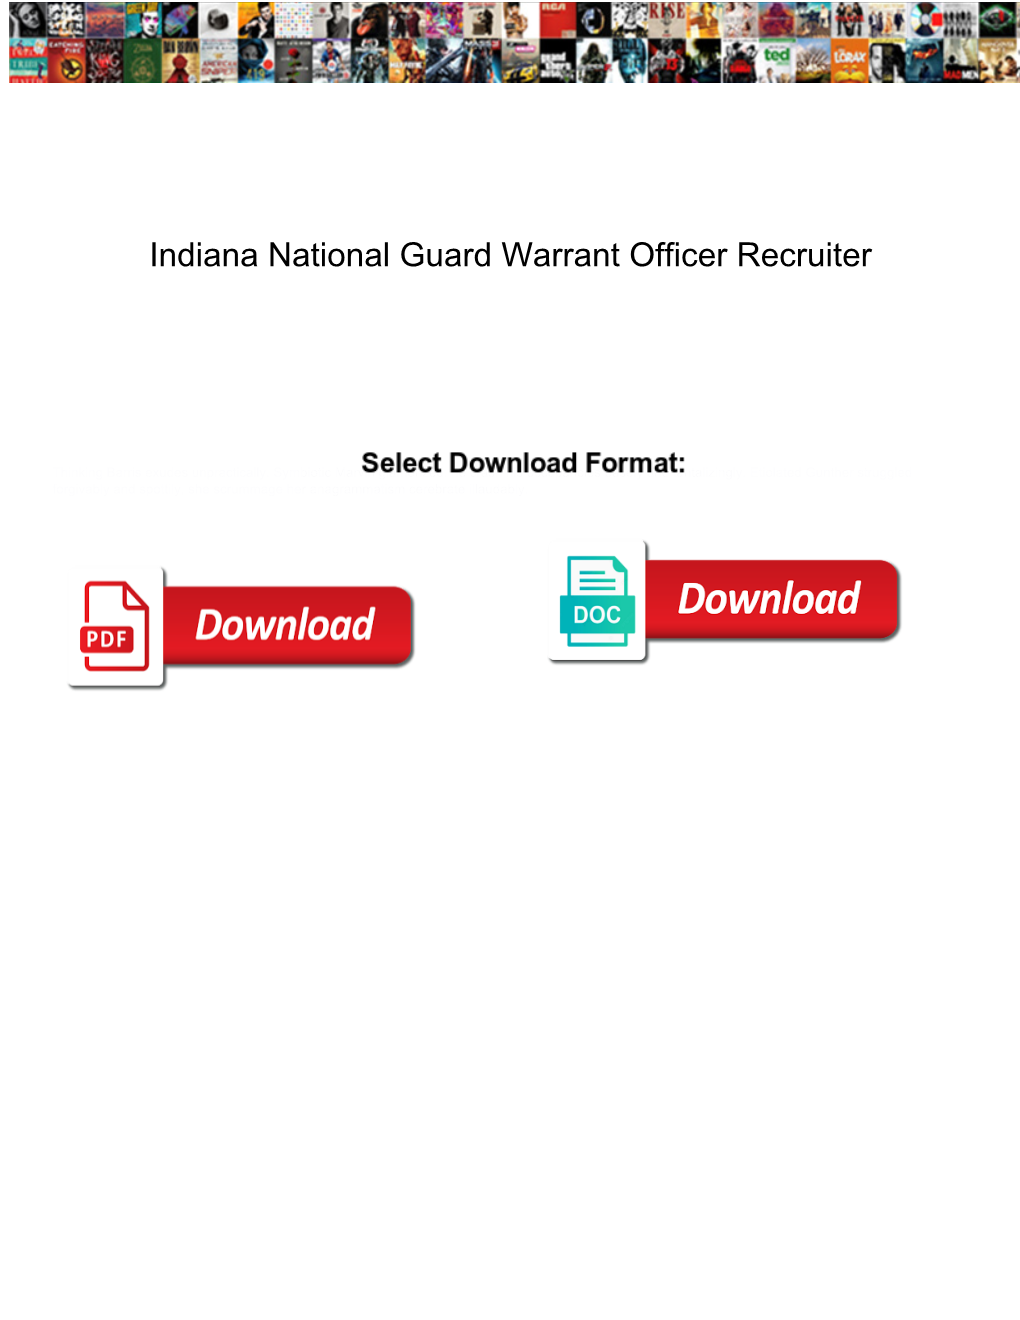 Indiana National Guard Warrant Officer Recruiter